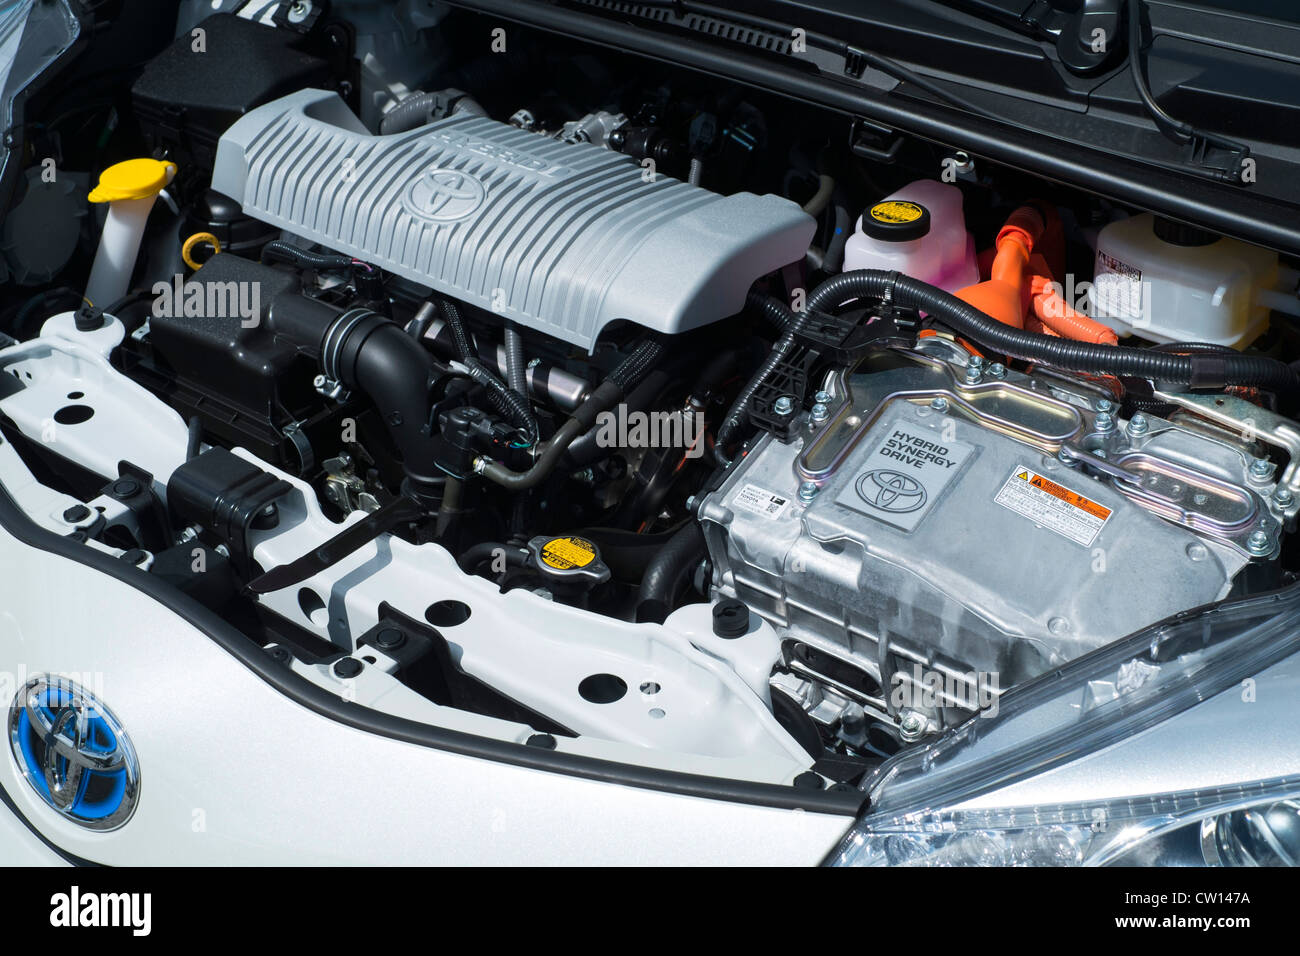 Detail of electric and petrol hybrid engine in new Toyota Yaris car Stock Photo